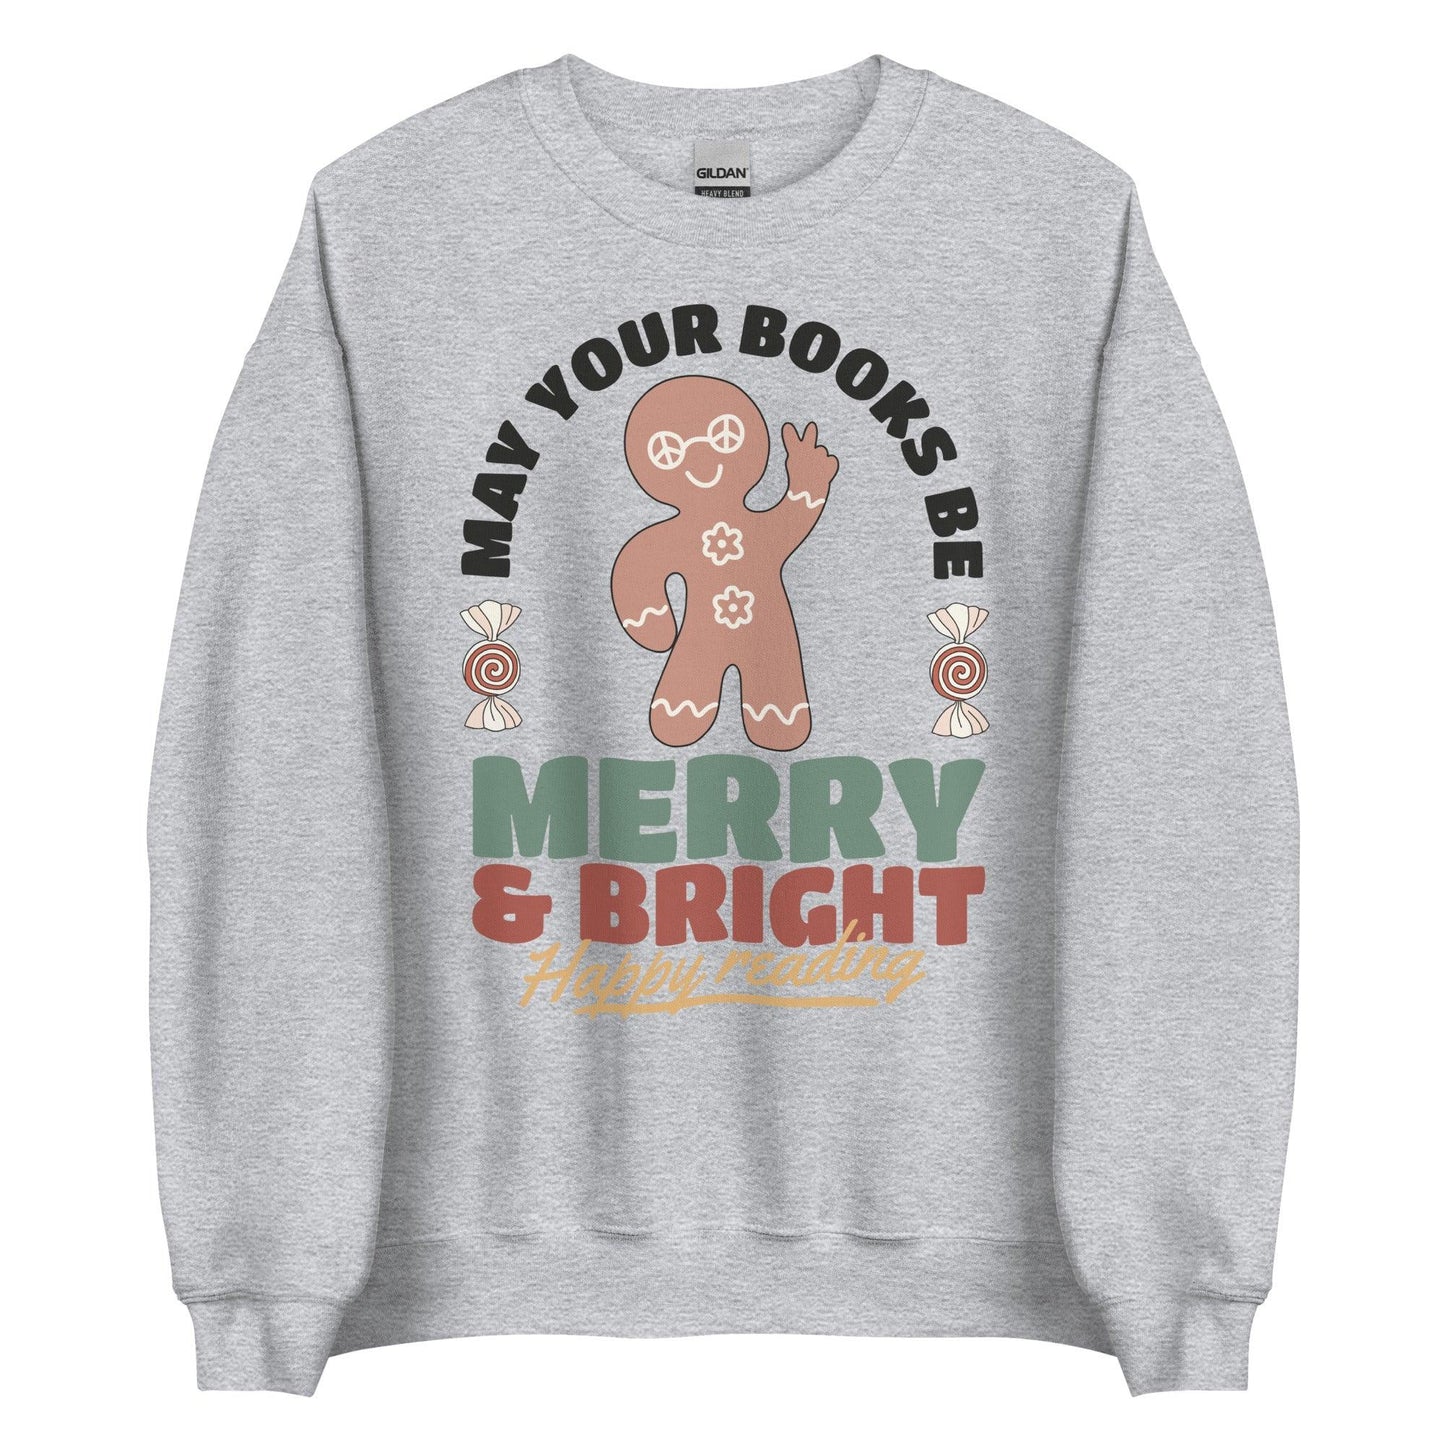 May Your Books Be Merry & Bright Sweater - The Bean Workshop - book lover, bookish, christmas, sweatshirt